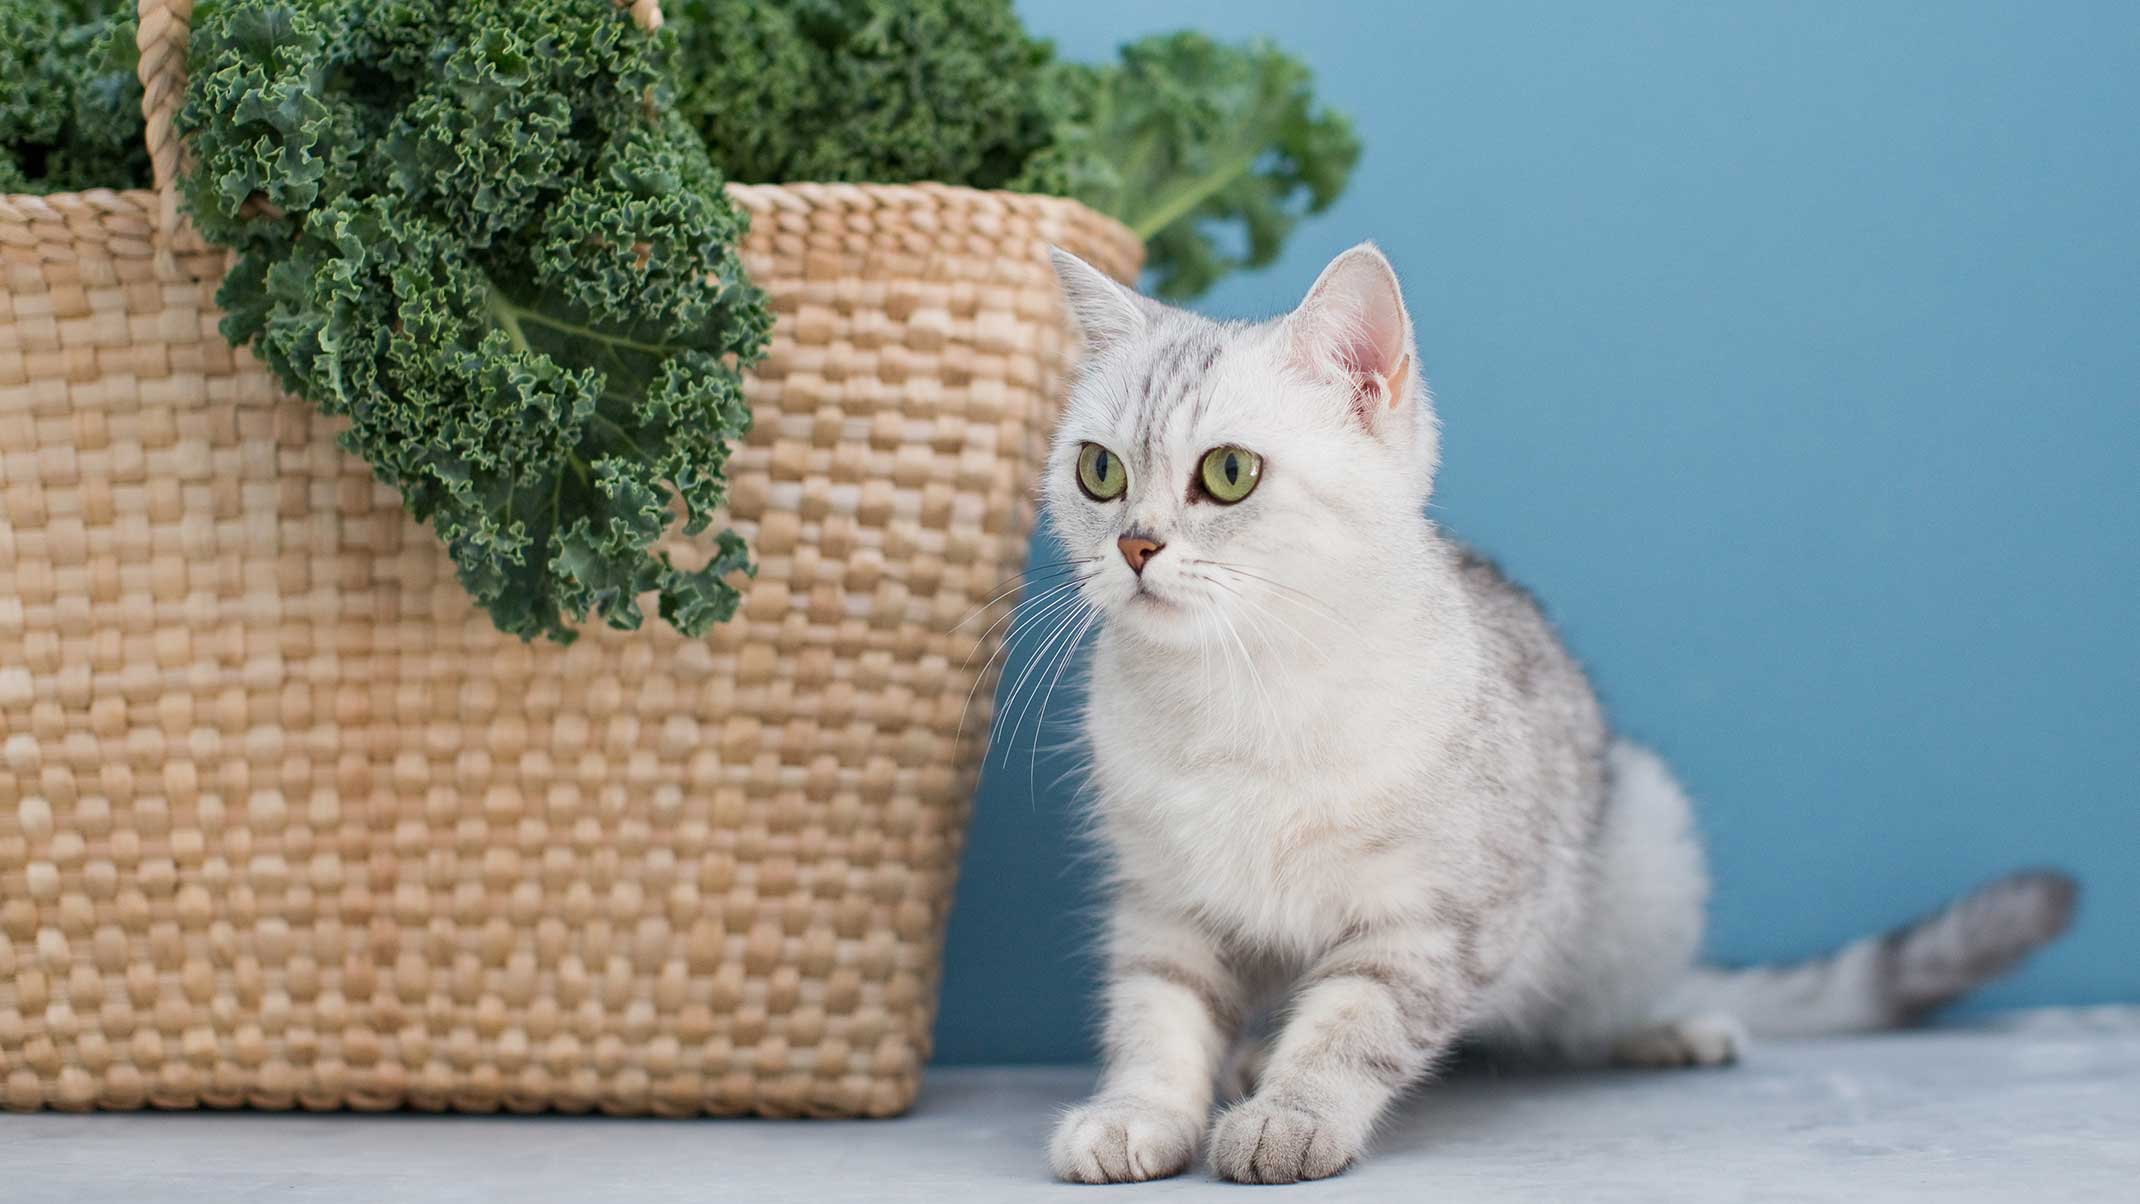 Cat superfoods – Kale offers a natural power boost